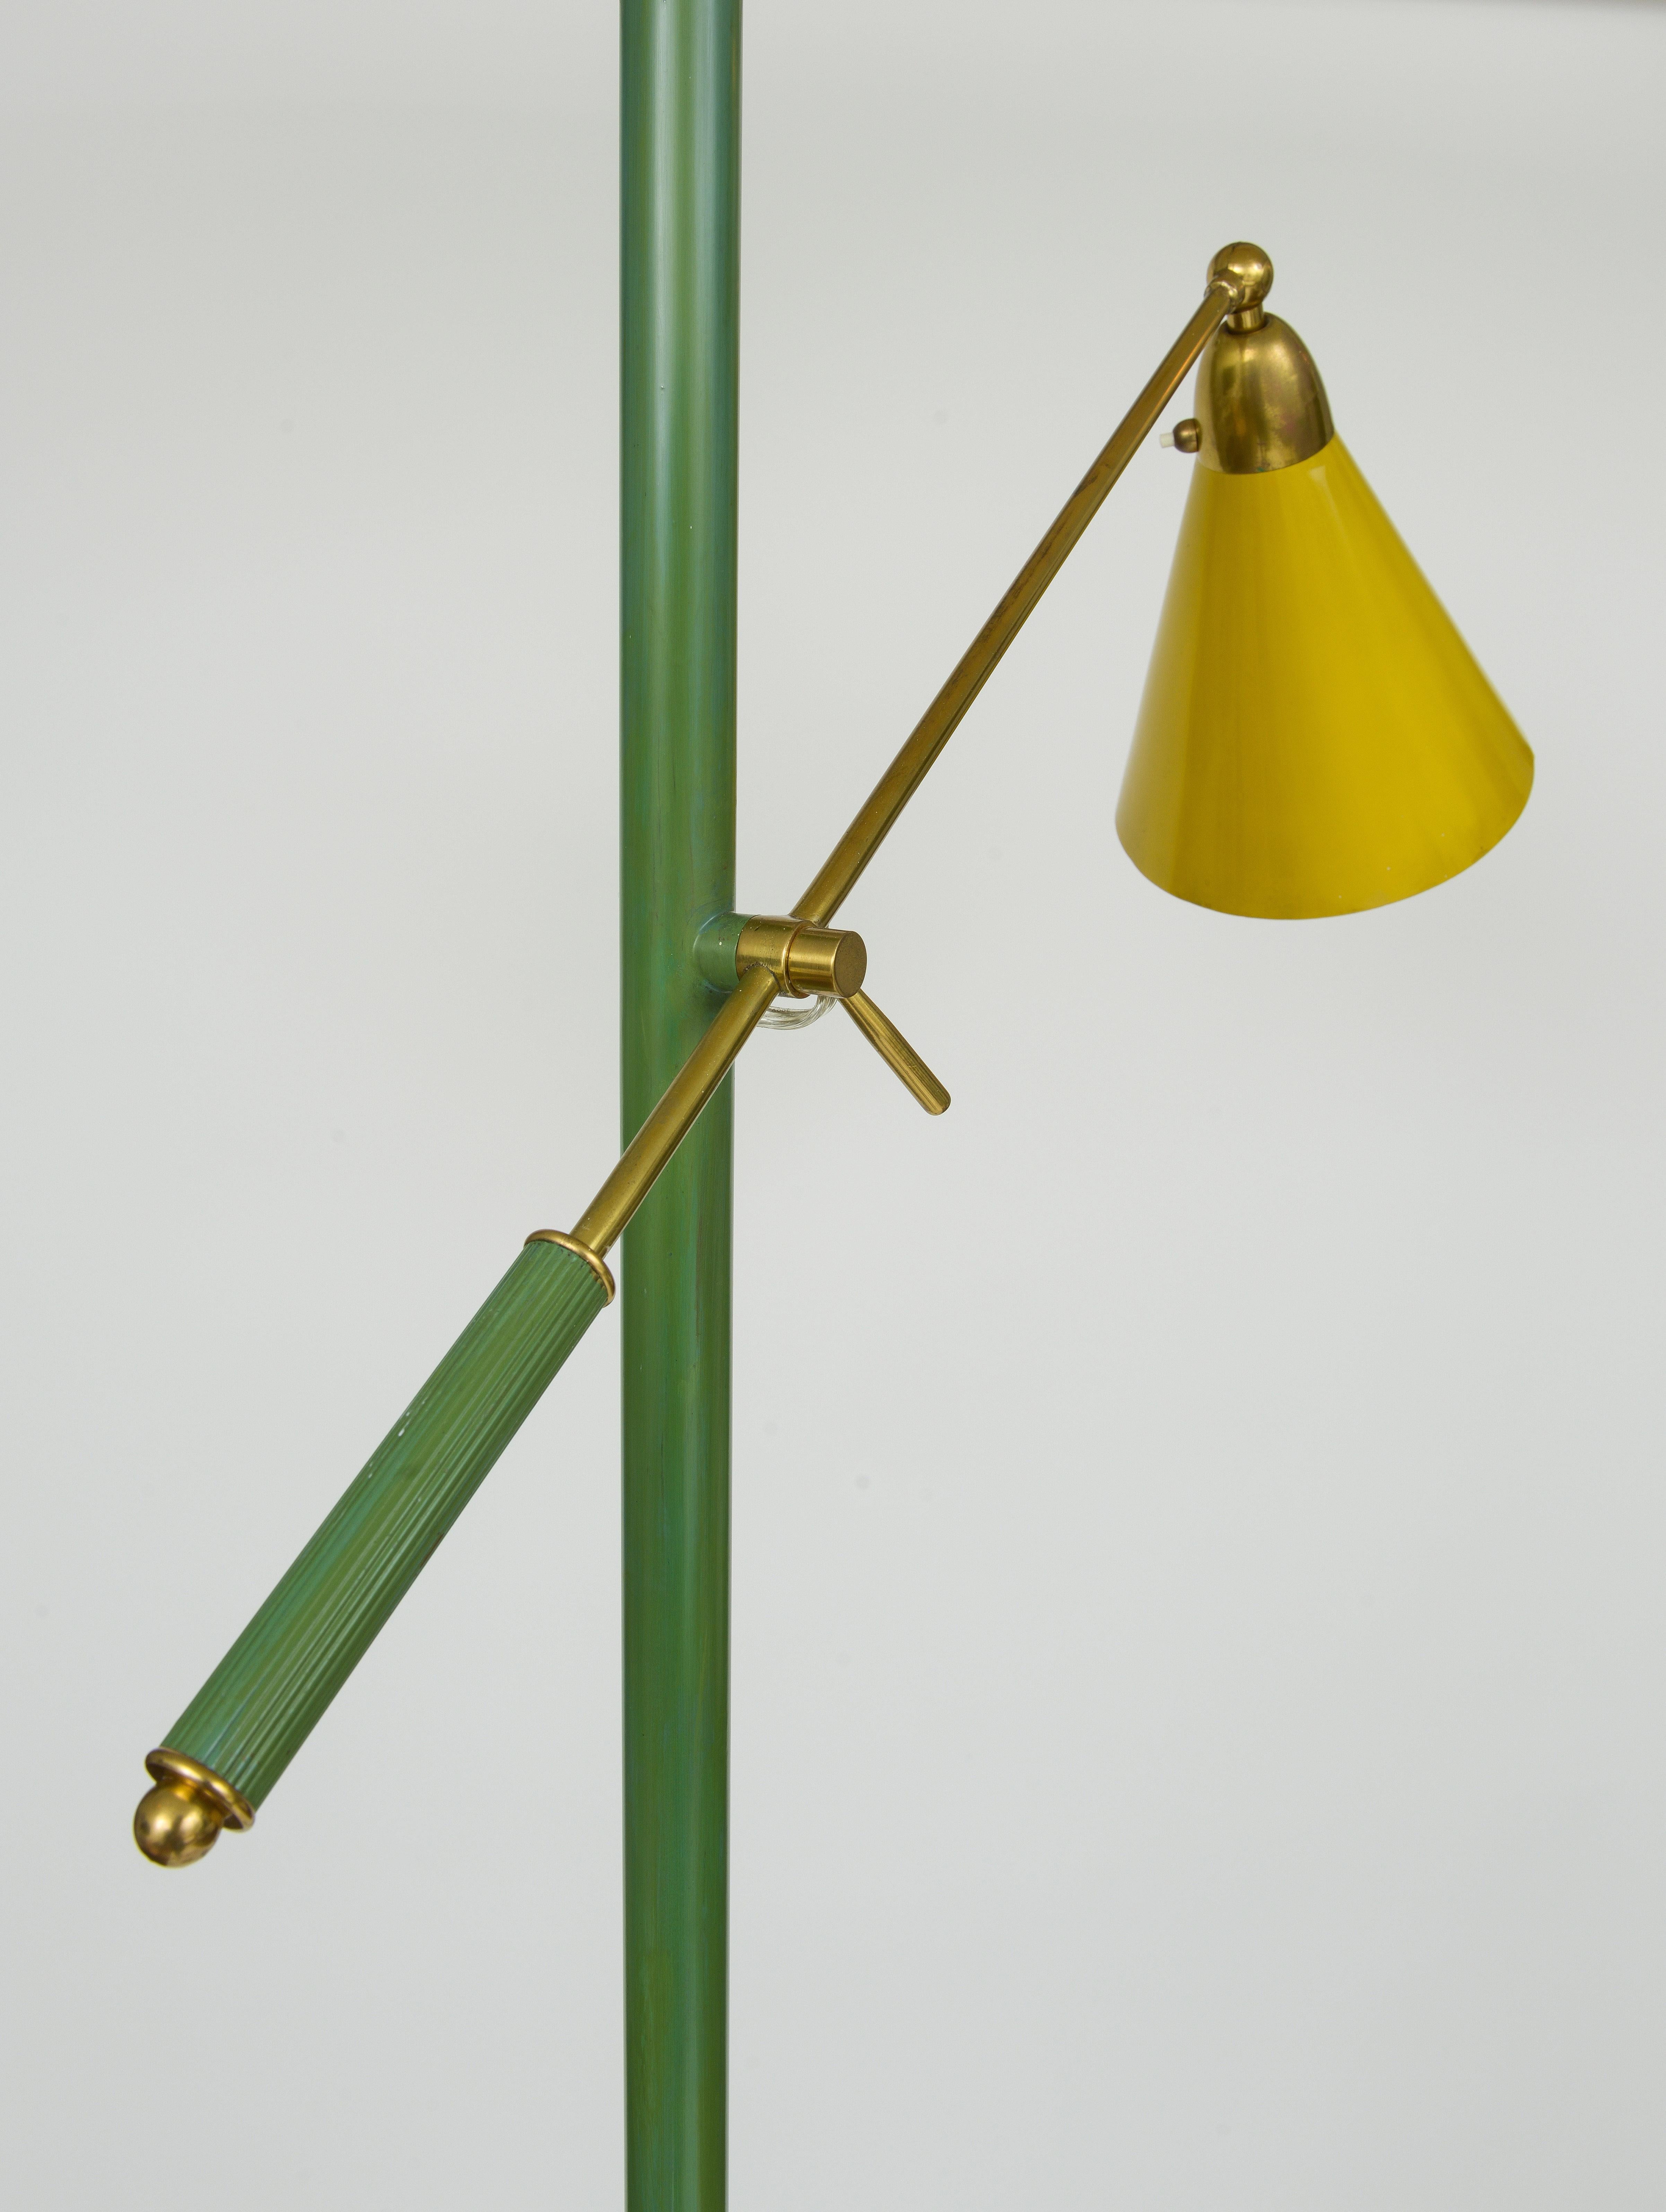 Italy, 1960's Round beige marble base green enameled stem adjustable arm with yellow shade beige enameled.
L 26 in H 78 in